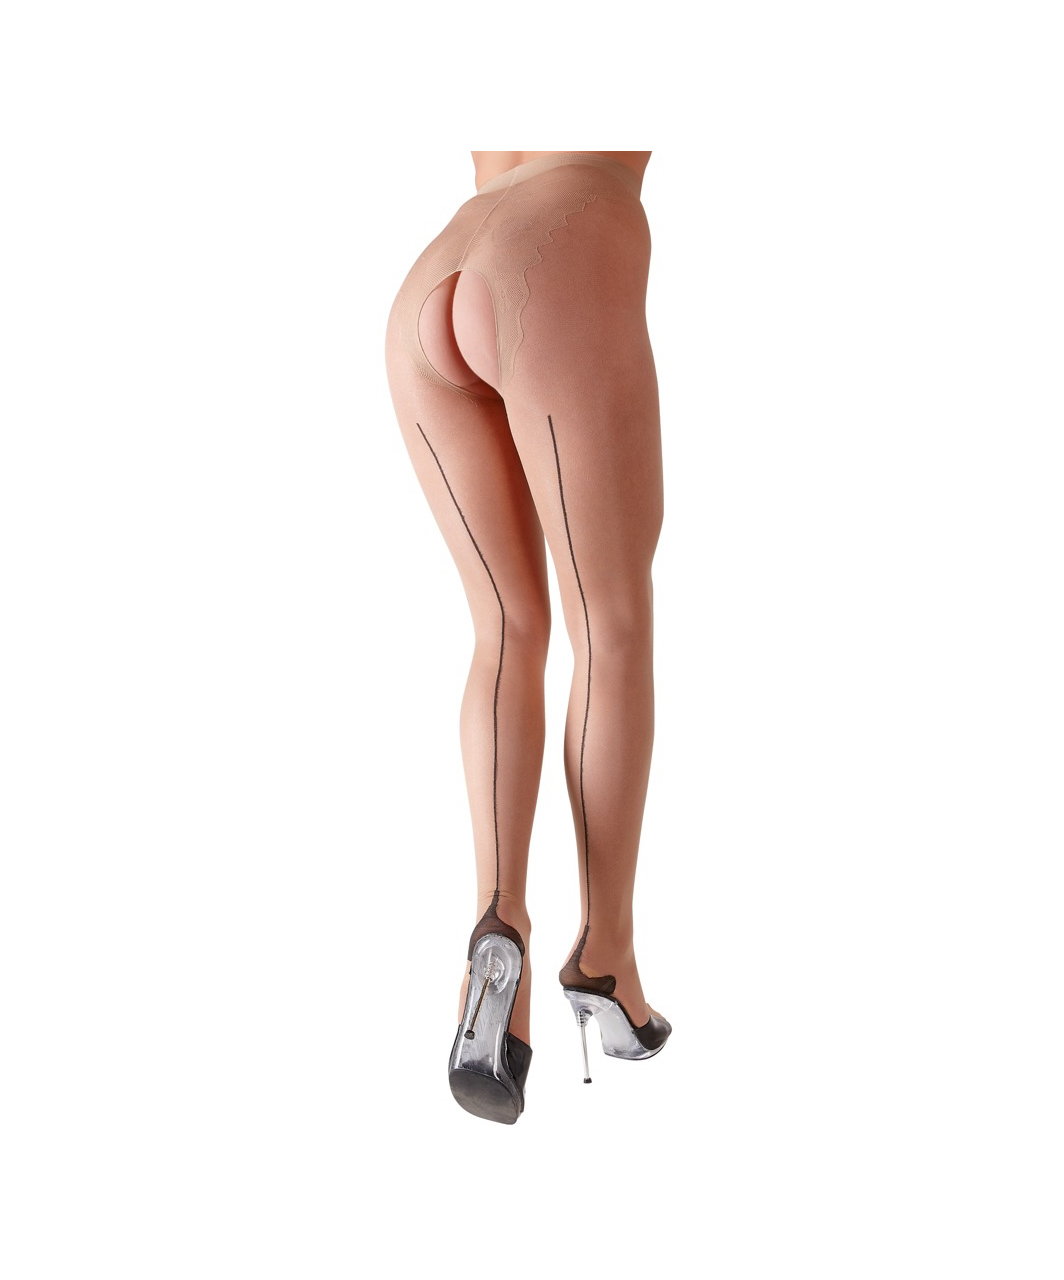 Cottelli Lingerie light skin tone crotchless tights with seam